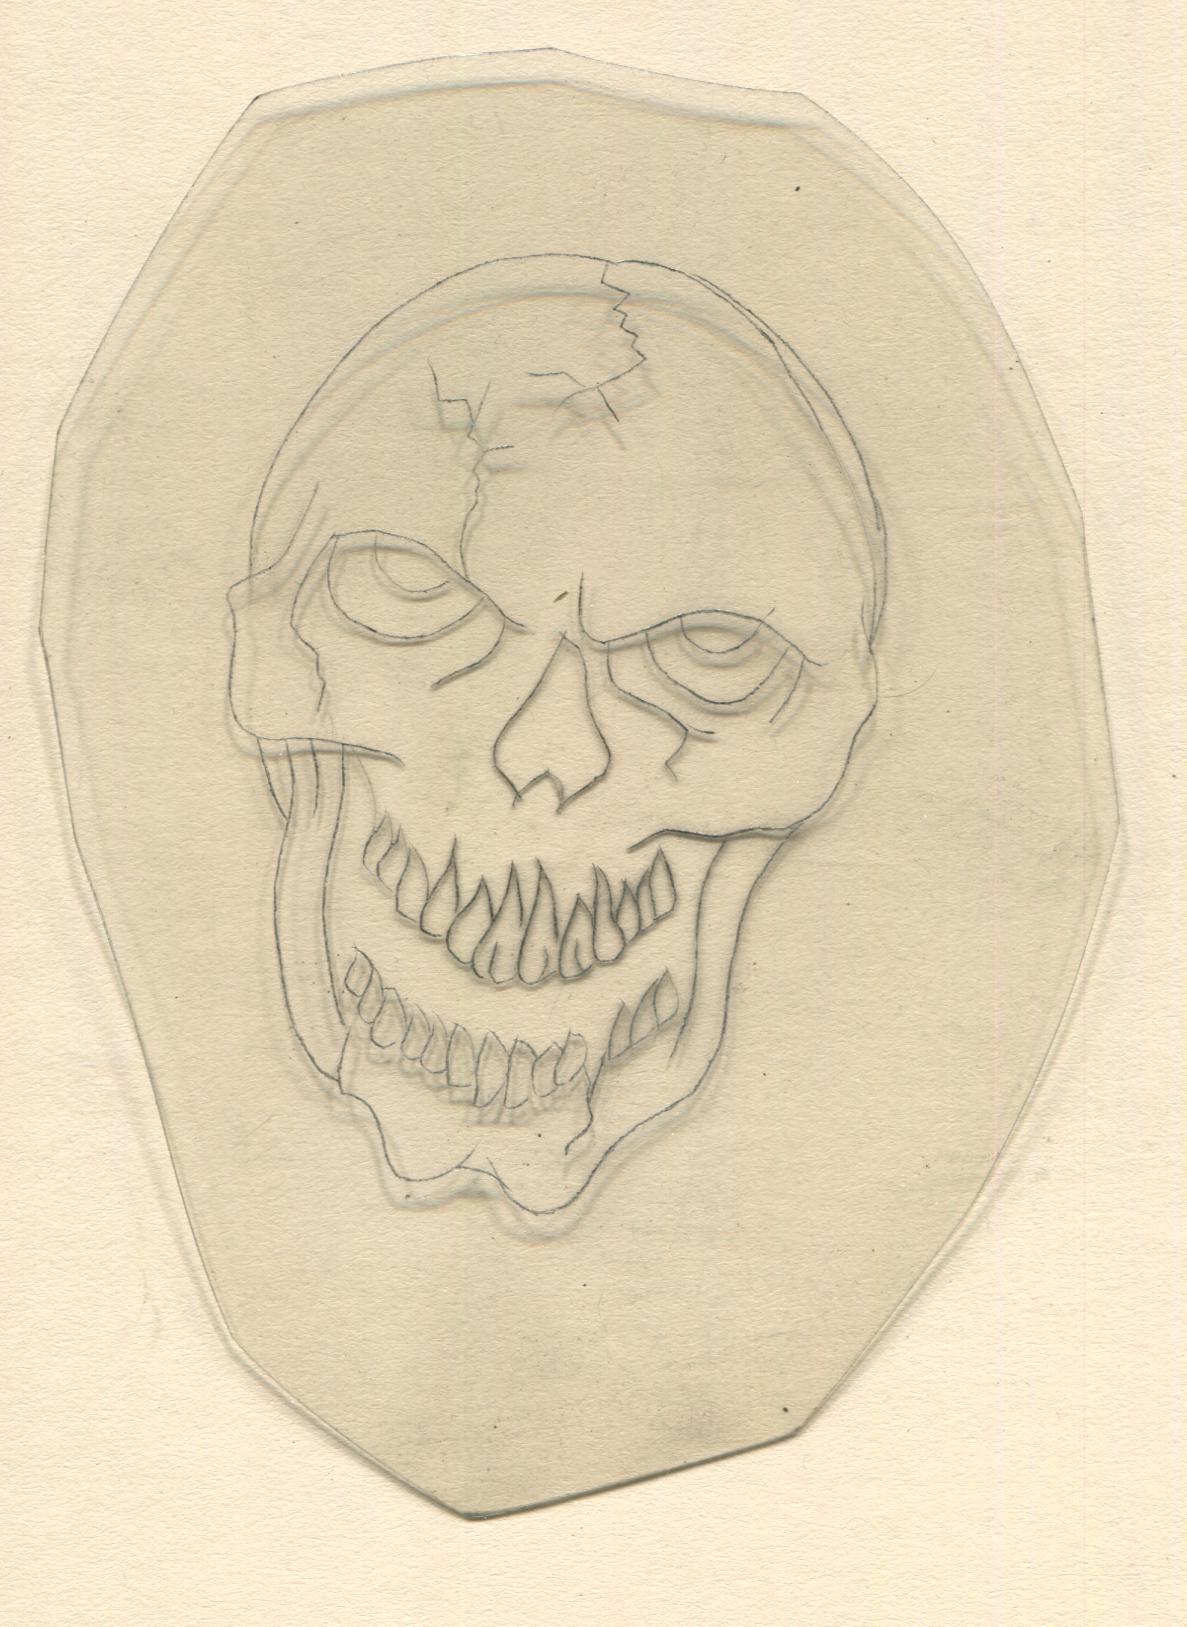 Laughing Skull Vintage Traditional Tattoo Acetate Stencil from Bert Grimm's Shop